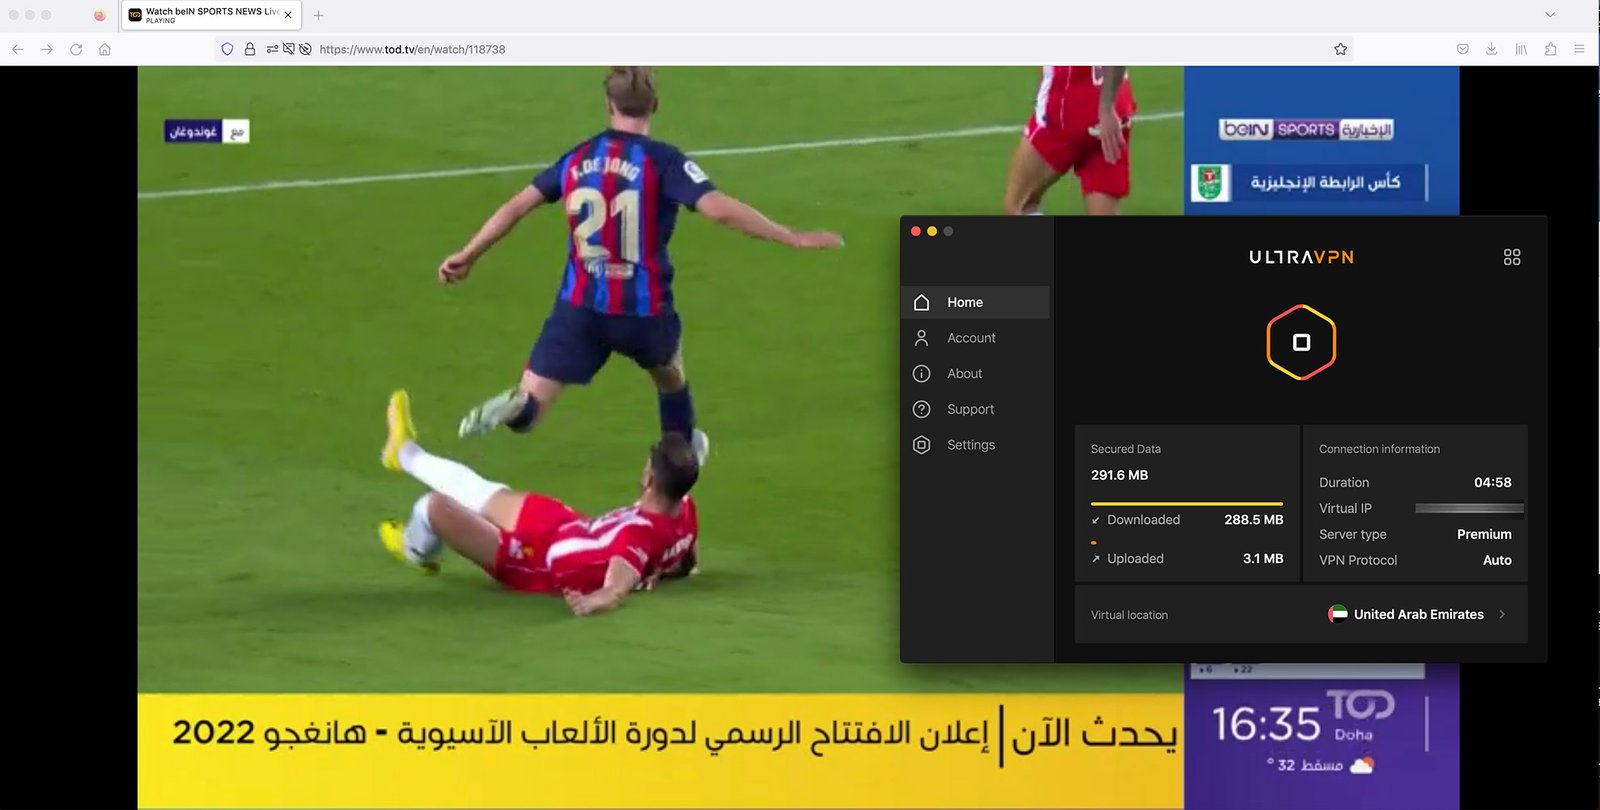 Watch TOD TV abroad - Streaming Free Live beIn Sports news with UltraVPN